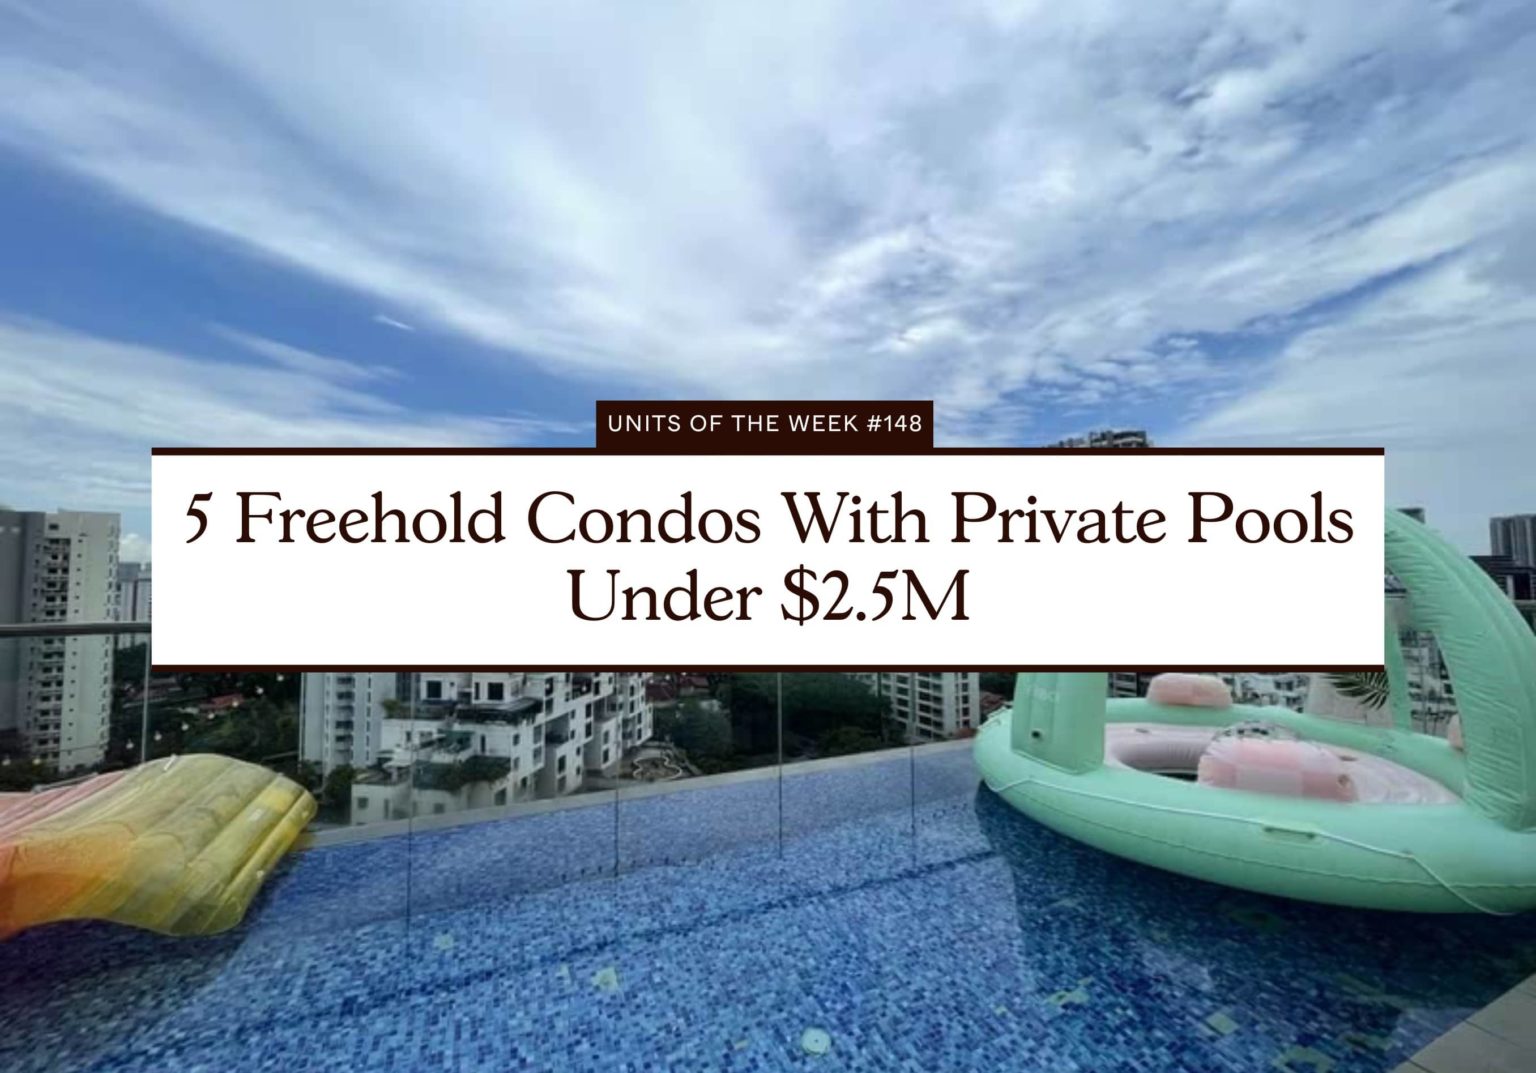 5 Freehold Condos With Private Pools Under 2.5M